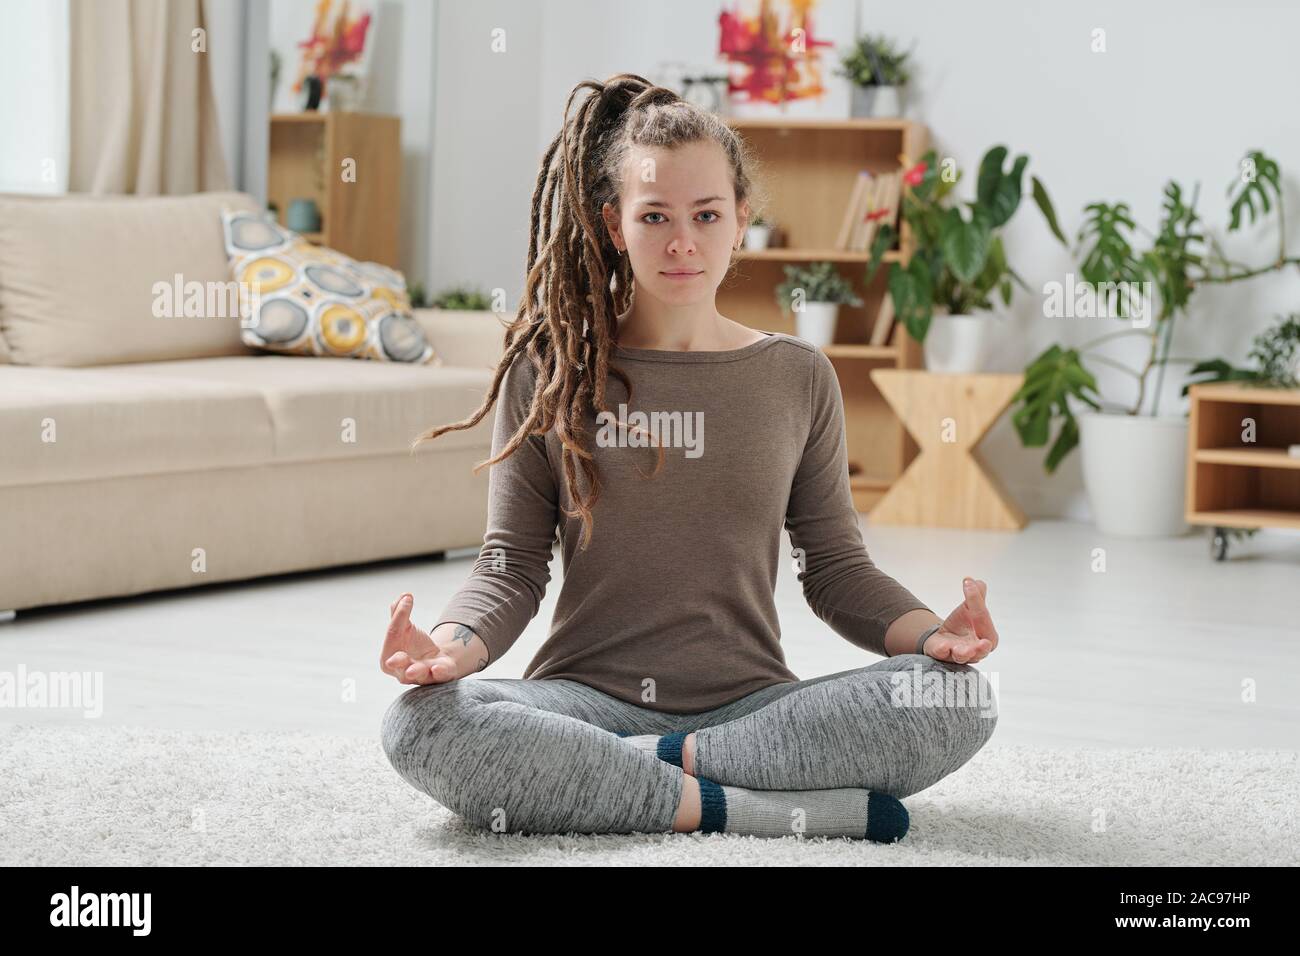 Serene girl in activewear crossing legs while practicing yoga on the floor Stock Photo